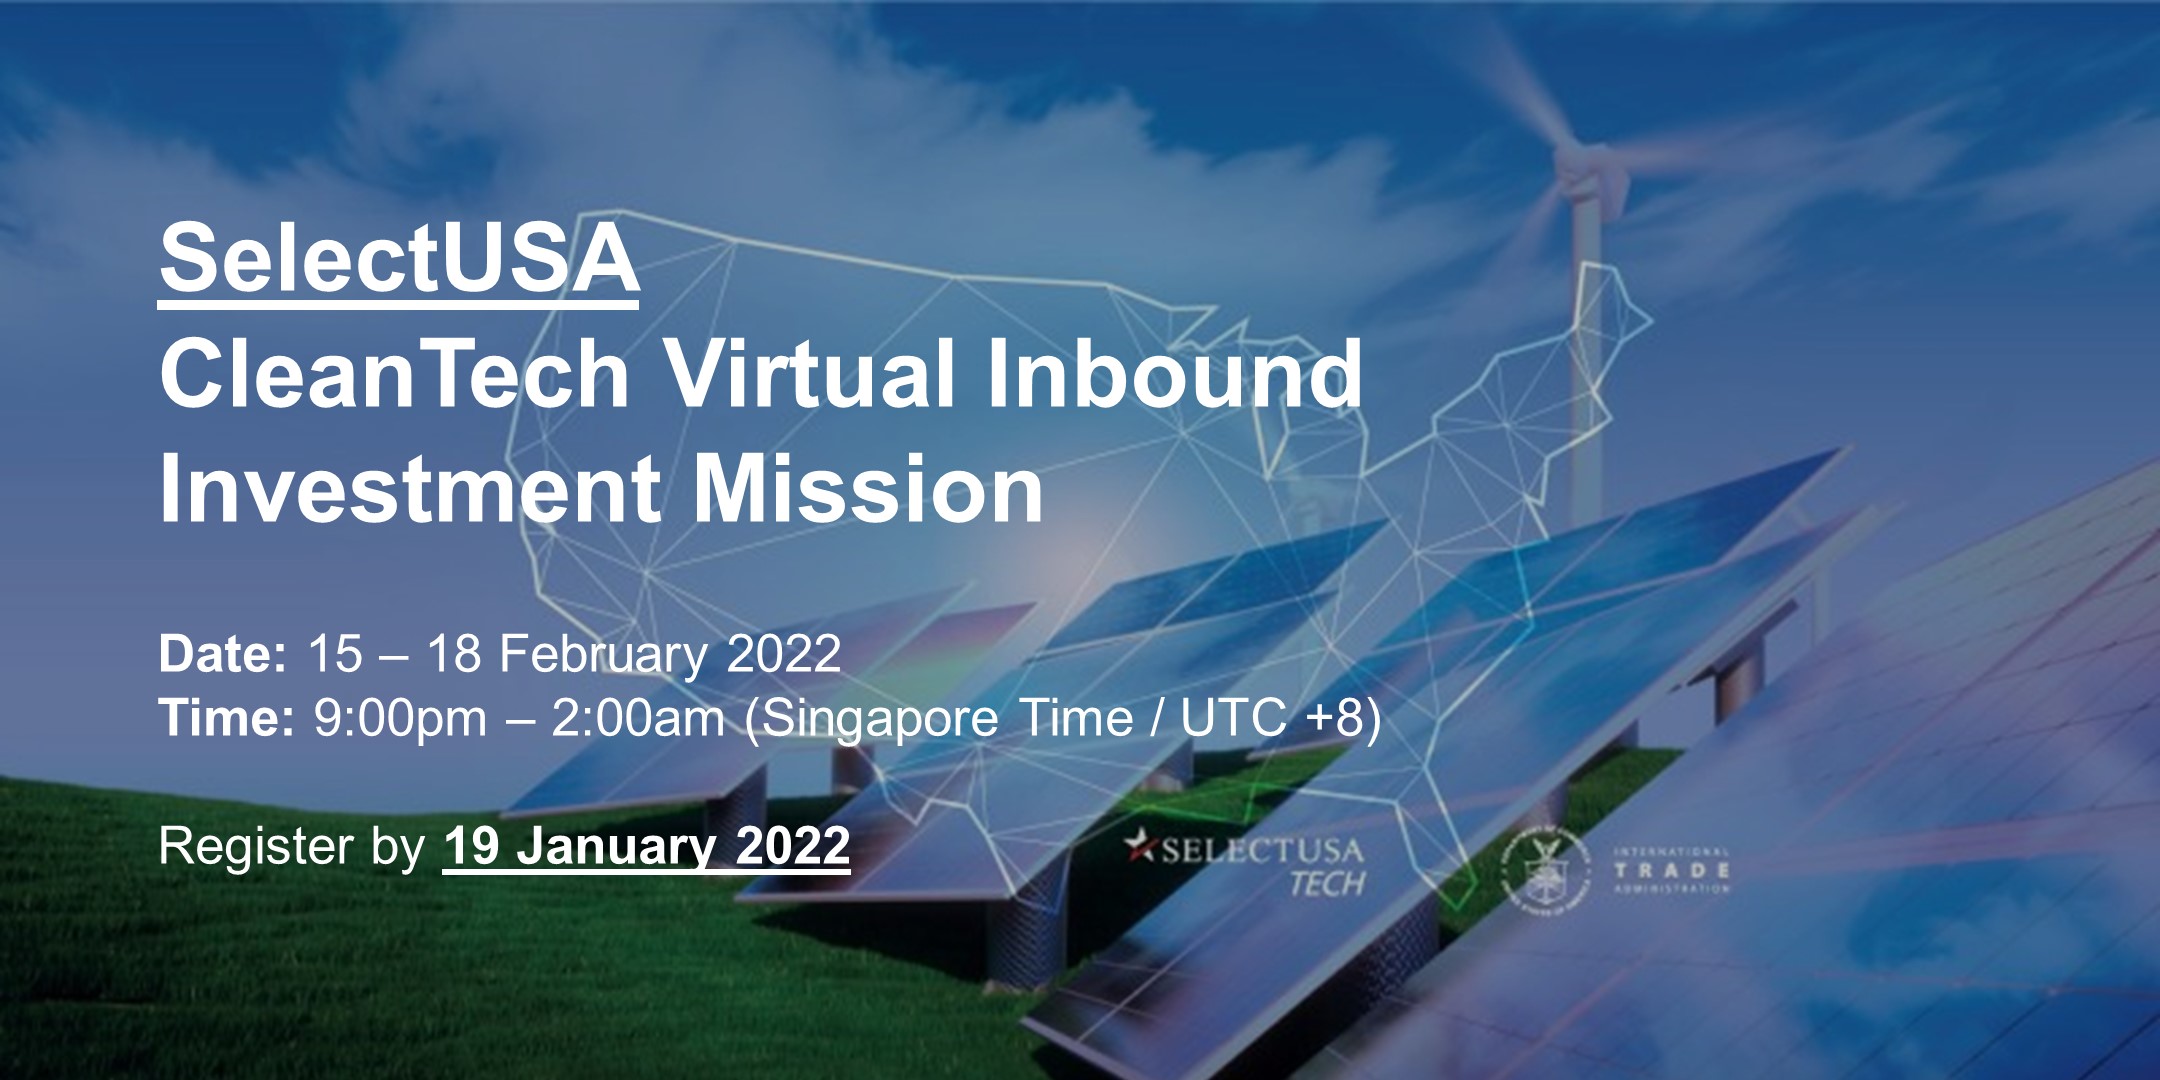 SelectUSA CleanTech Virtual Inbound Investment Mission